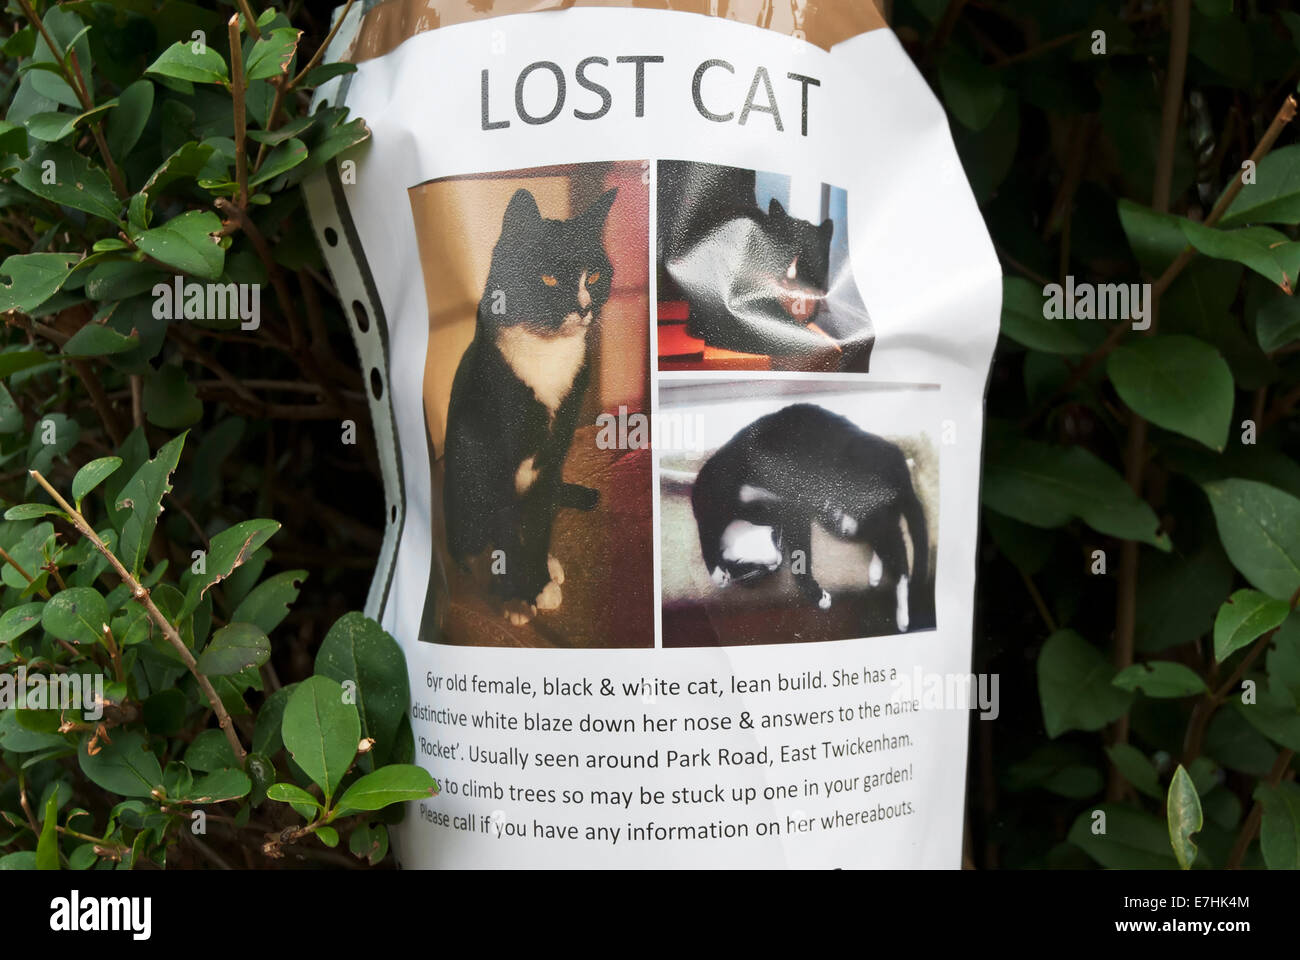 lost cat poster Stock Photo